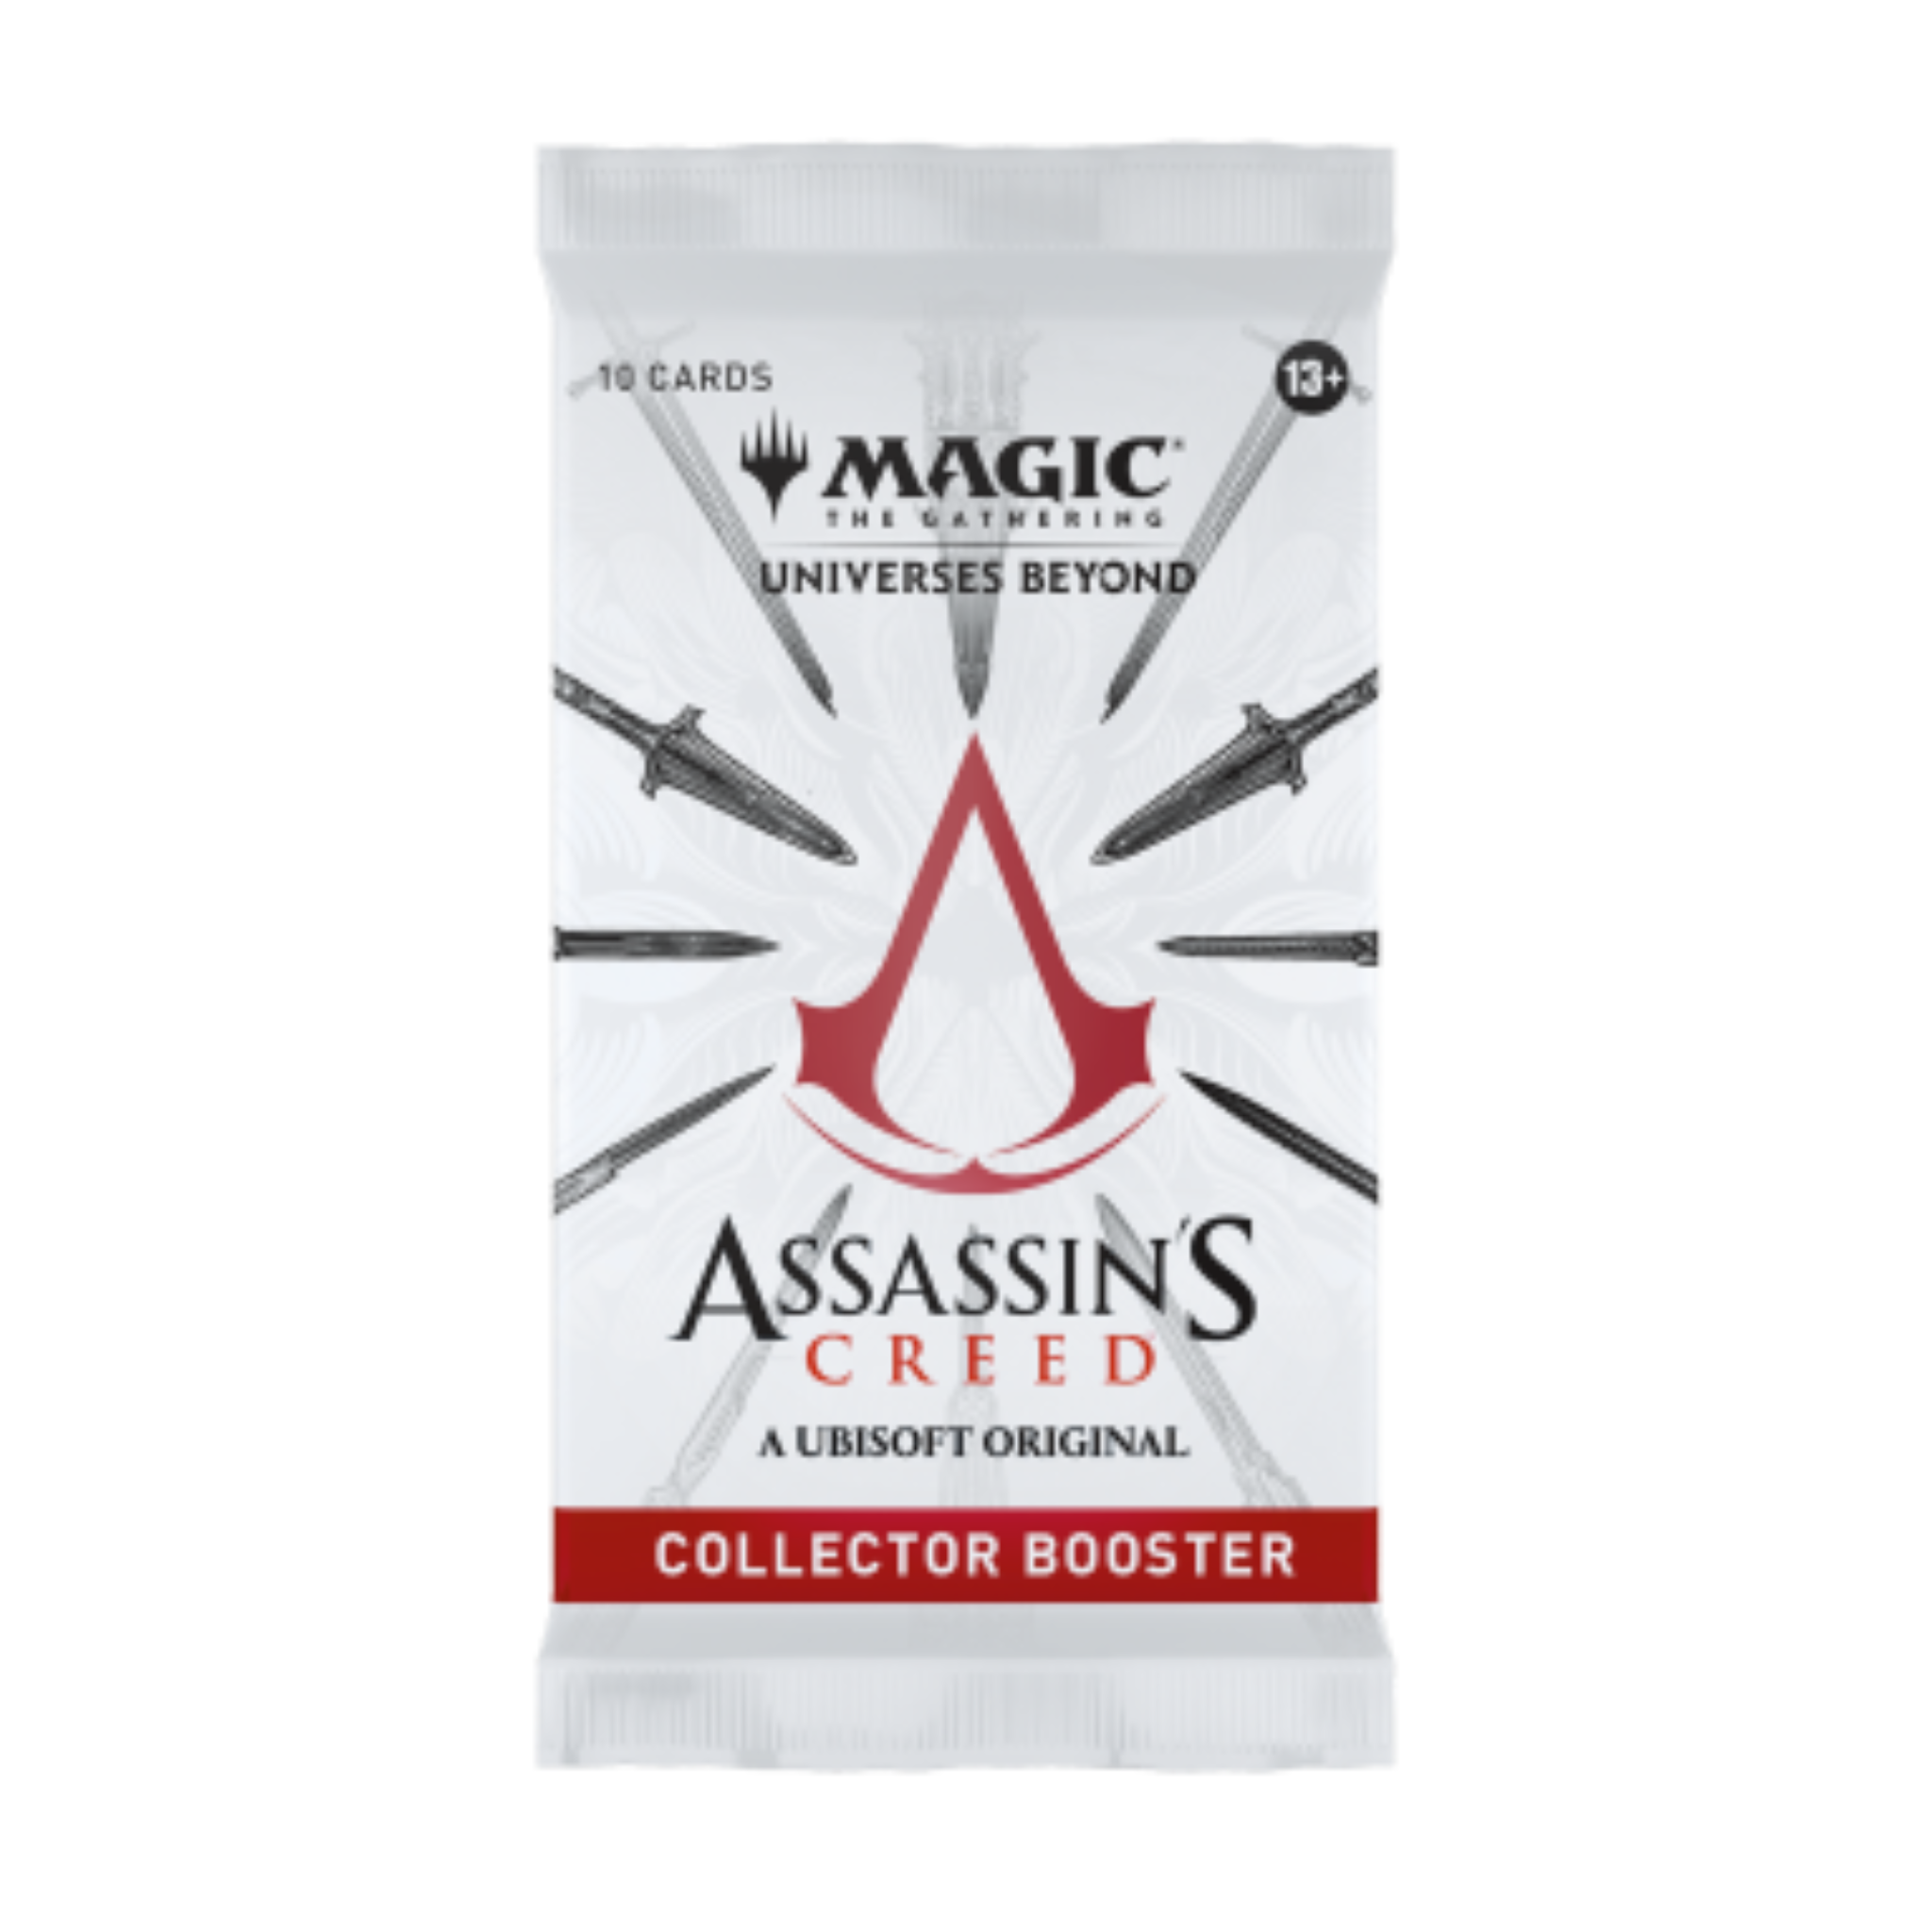 Magic: The Gathering -Universes Beyond: Assassin's Creed - Collectors Booster Box - EN